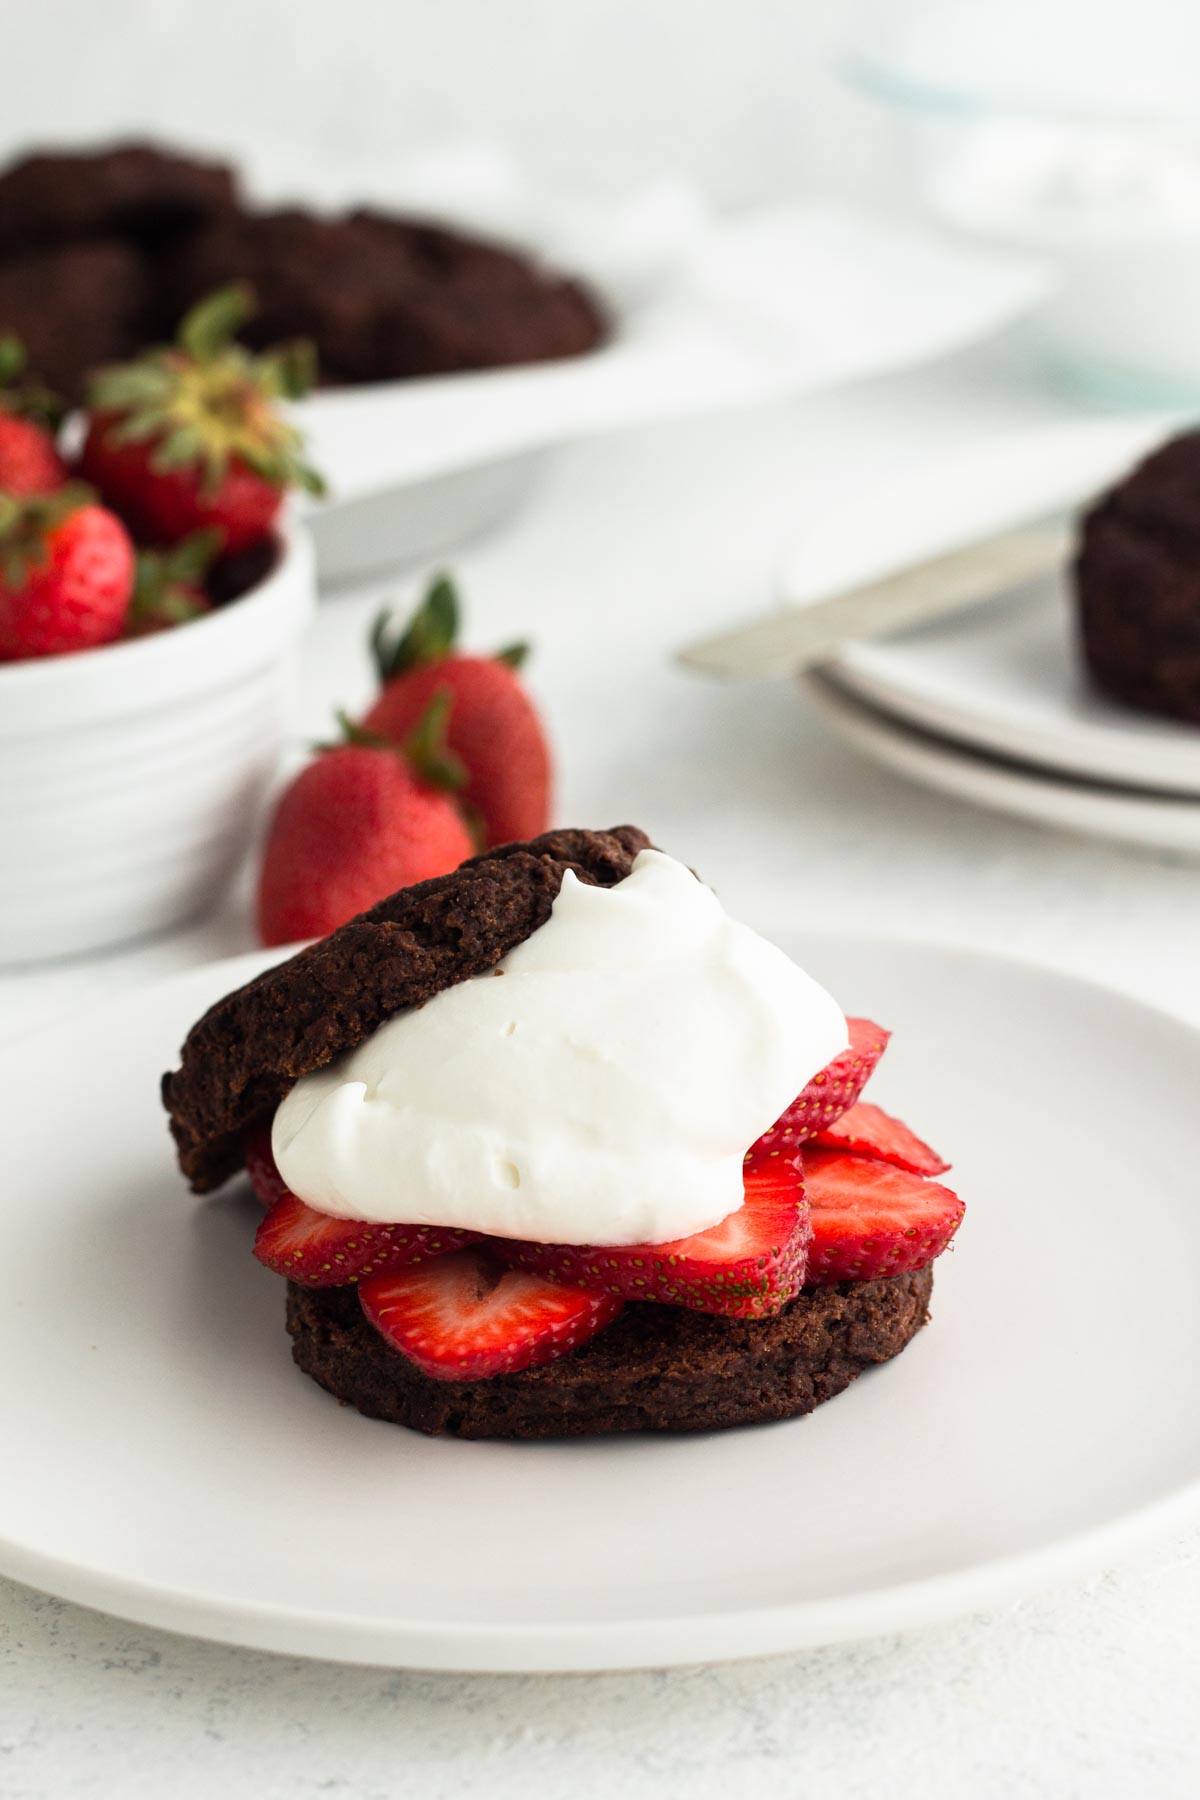 angled side view of a chocolate buttermilk biscuit topped with fresh strawberries and homemade whipped cream on a white plate